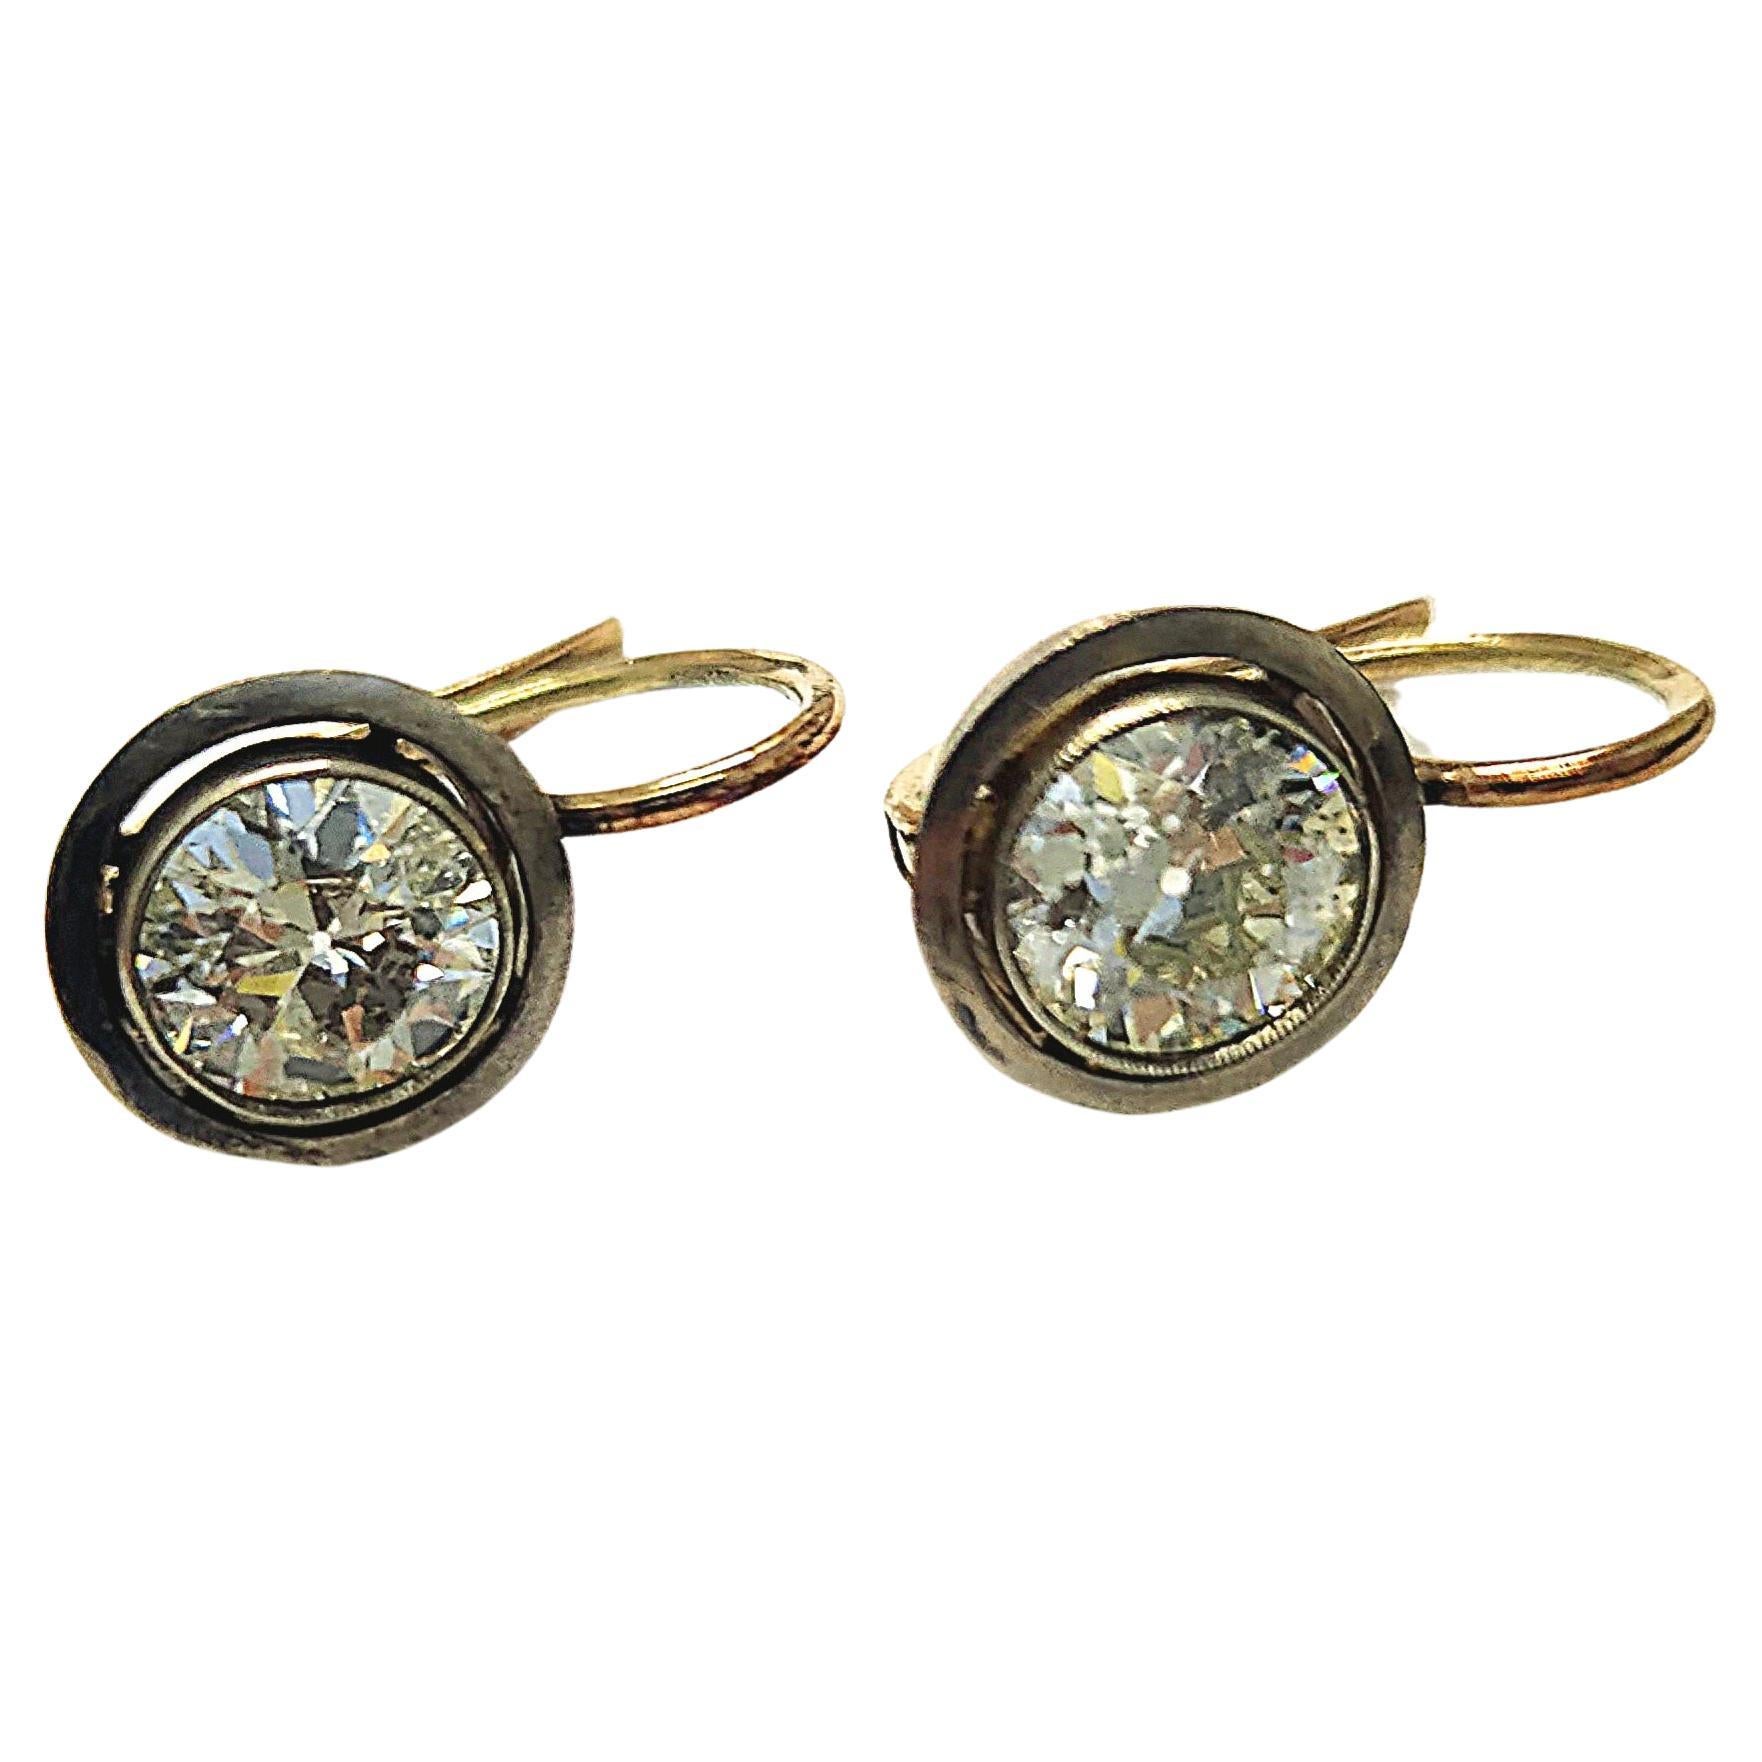 14k gold earrings in solitaire style with 2 old mine cut diamonds total weight of 2 carats 6.1mm diameter each stone H color white vs clearity excellent cut and spark